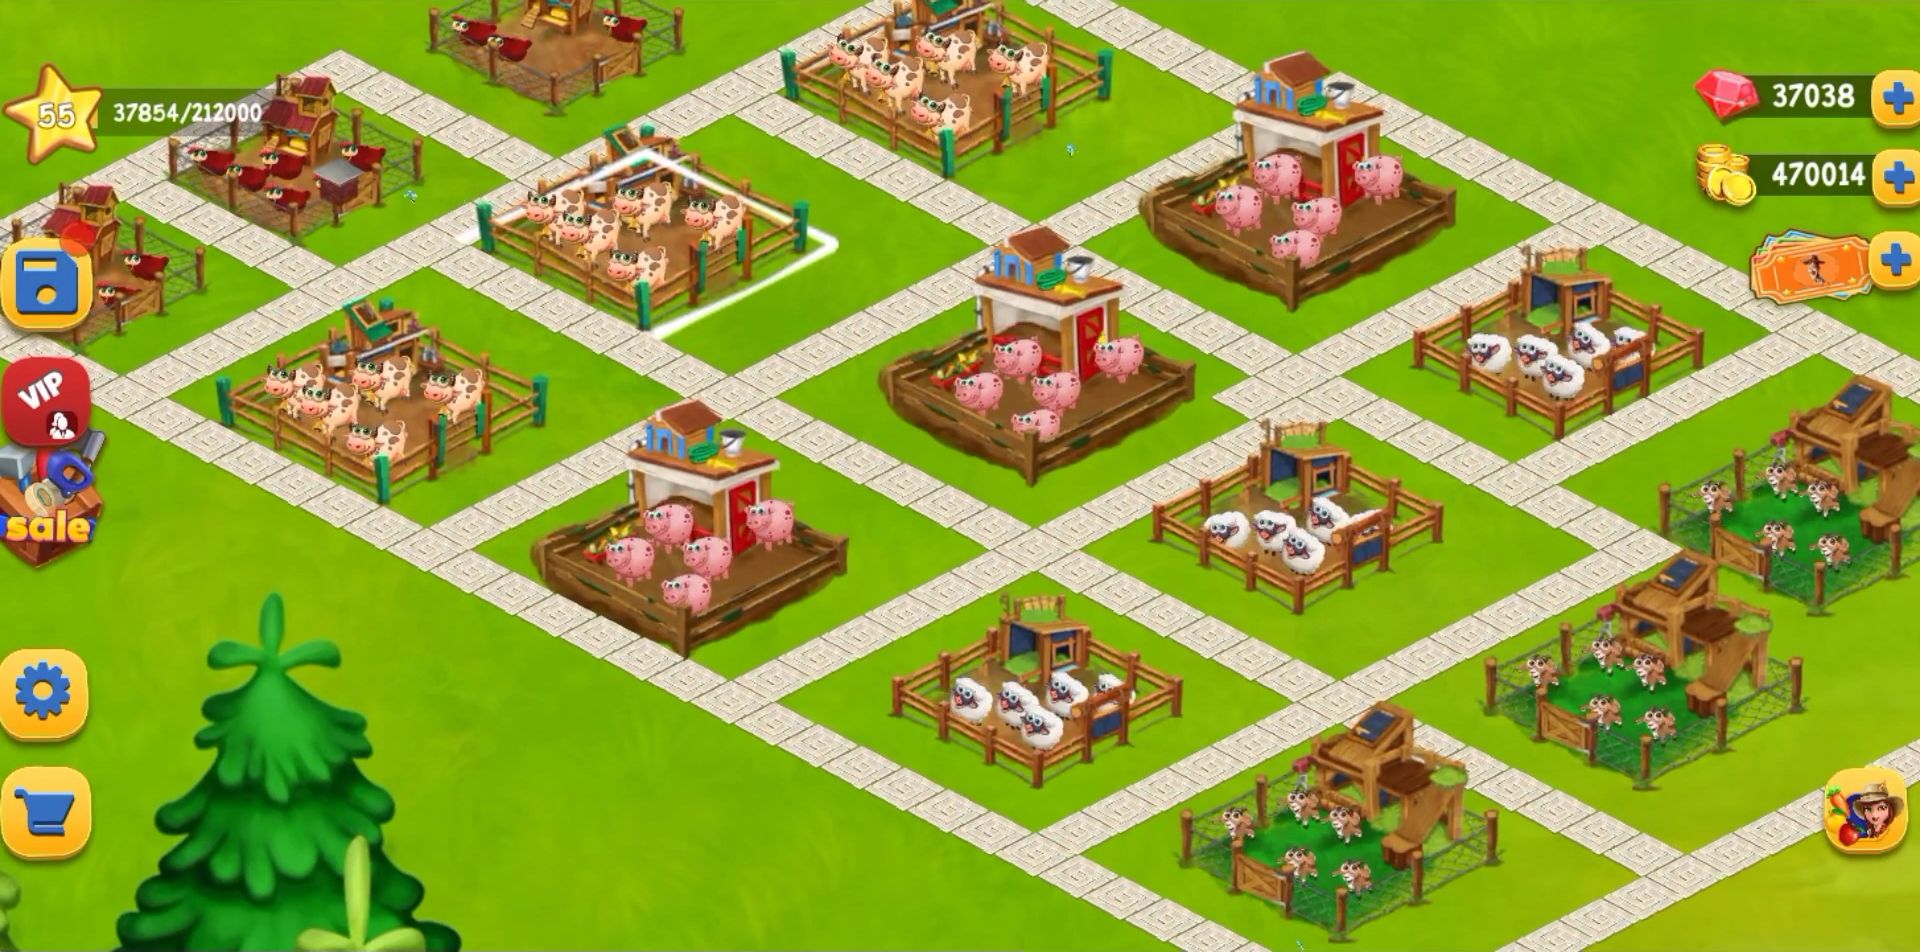 Farm Day Village Farming: Offline Games for Android